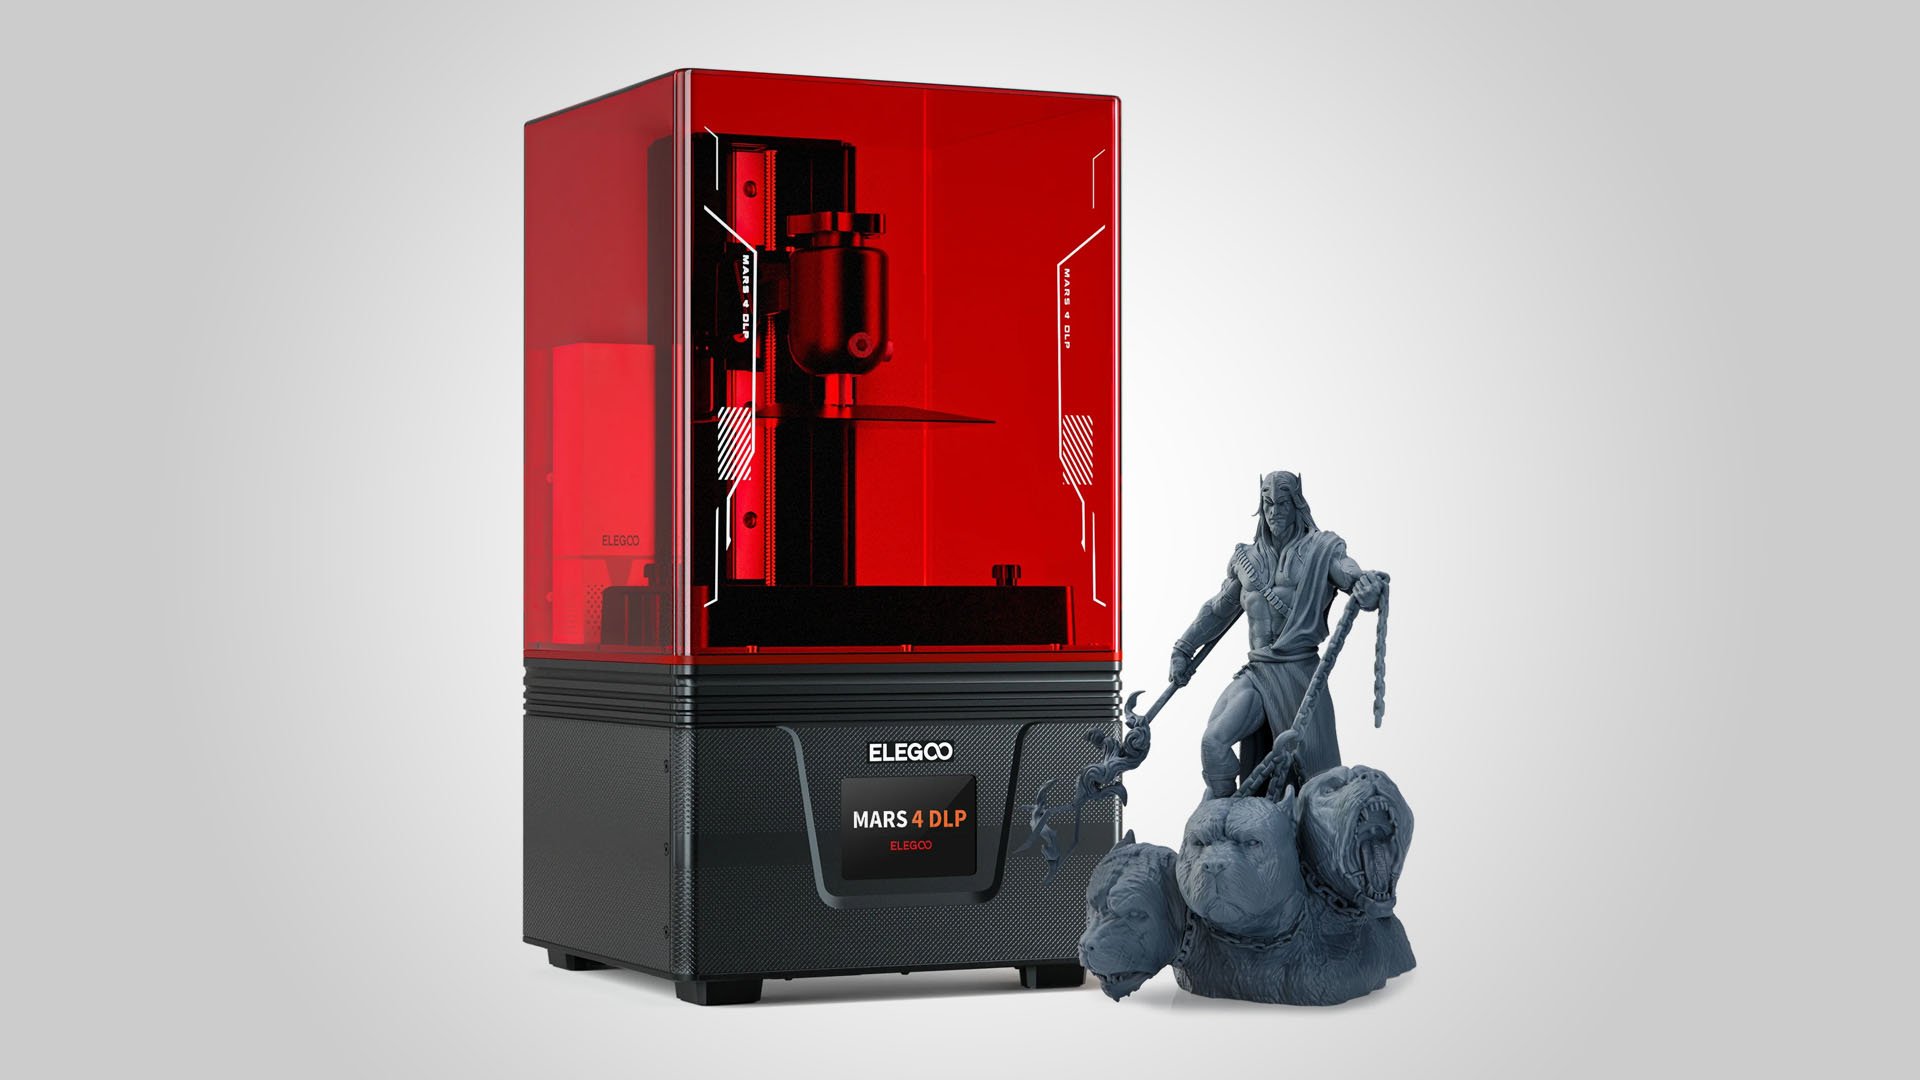 The Elegoo Mars 4 is Bringing Some Competition to DLP Resin 3D